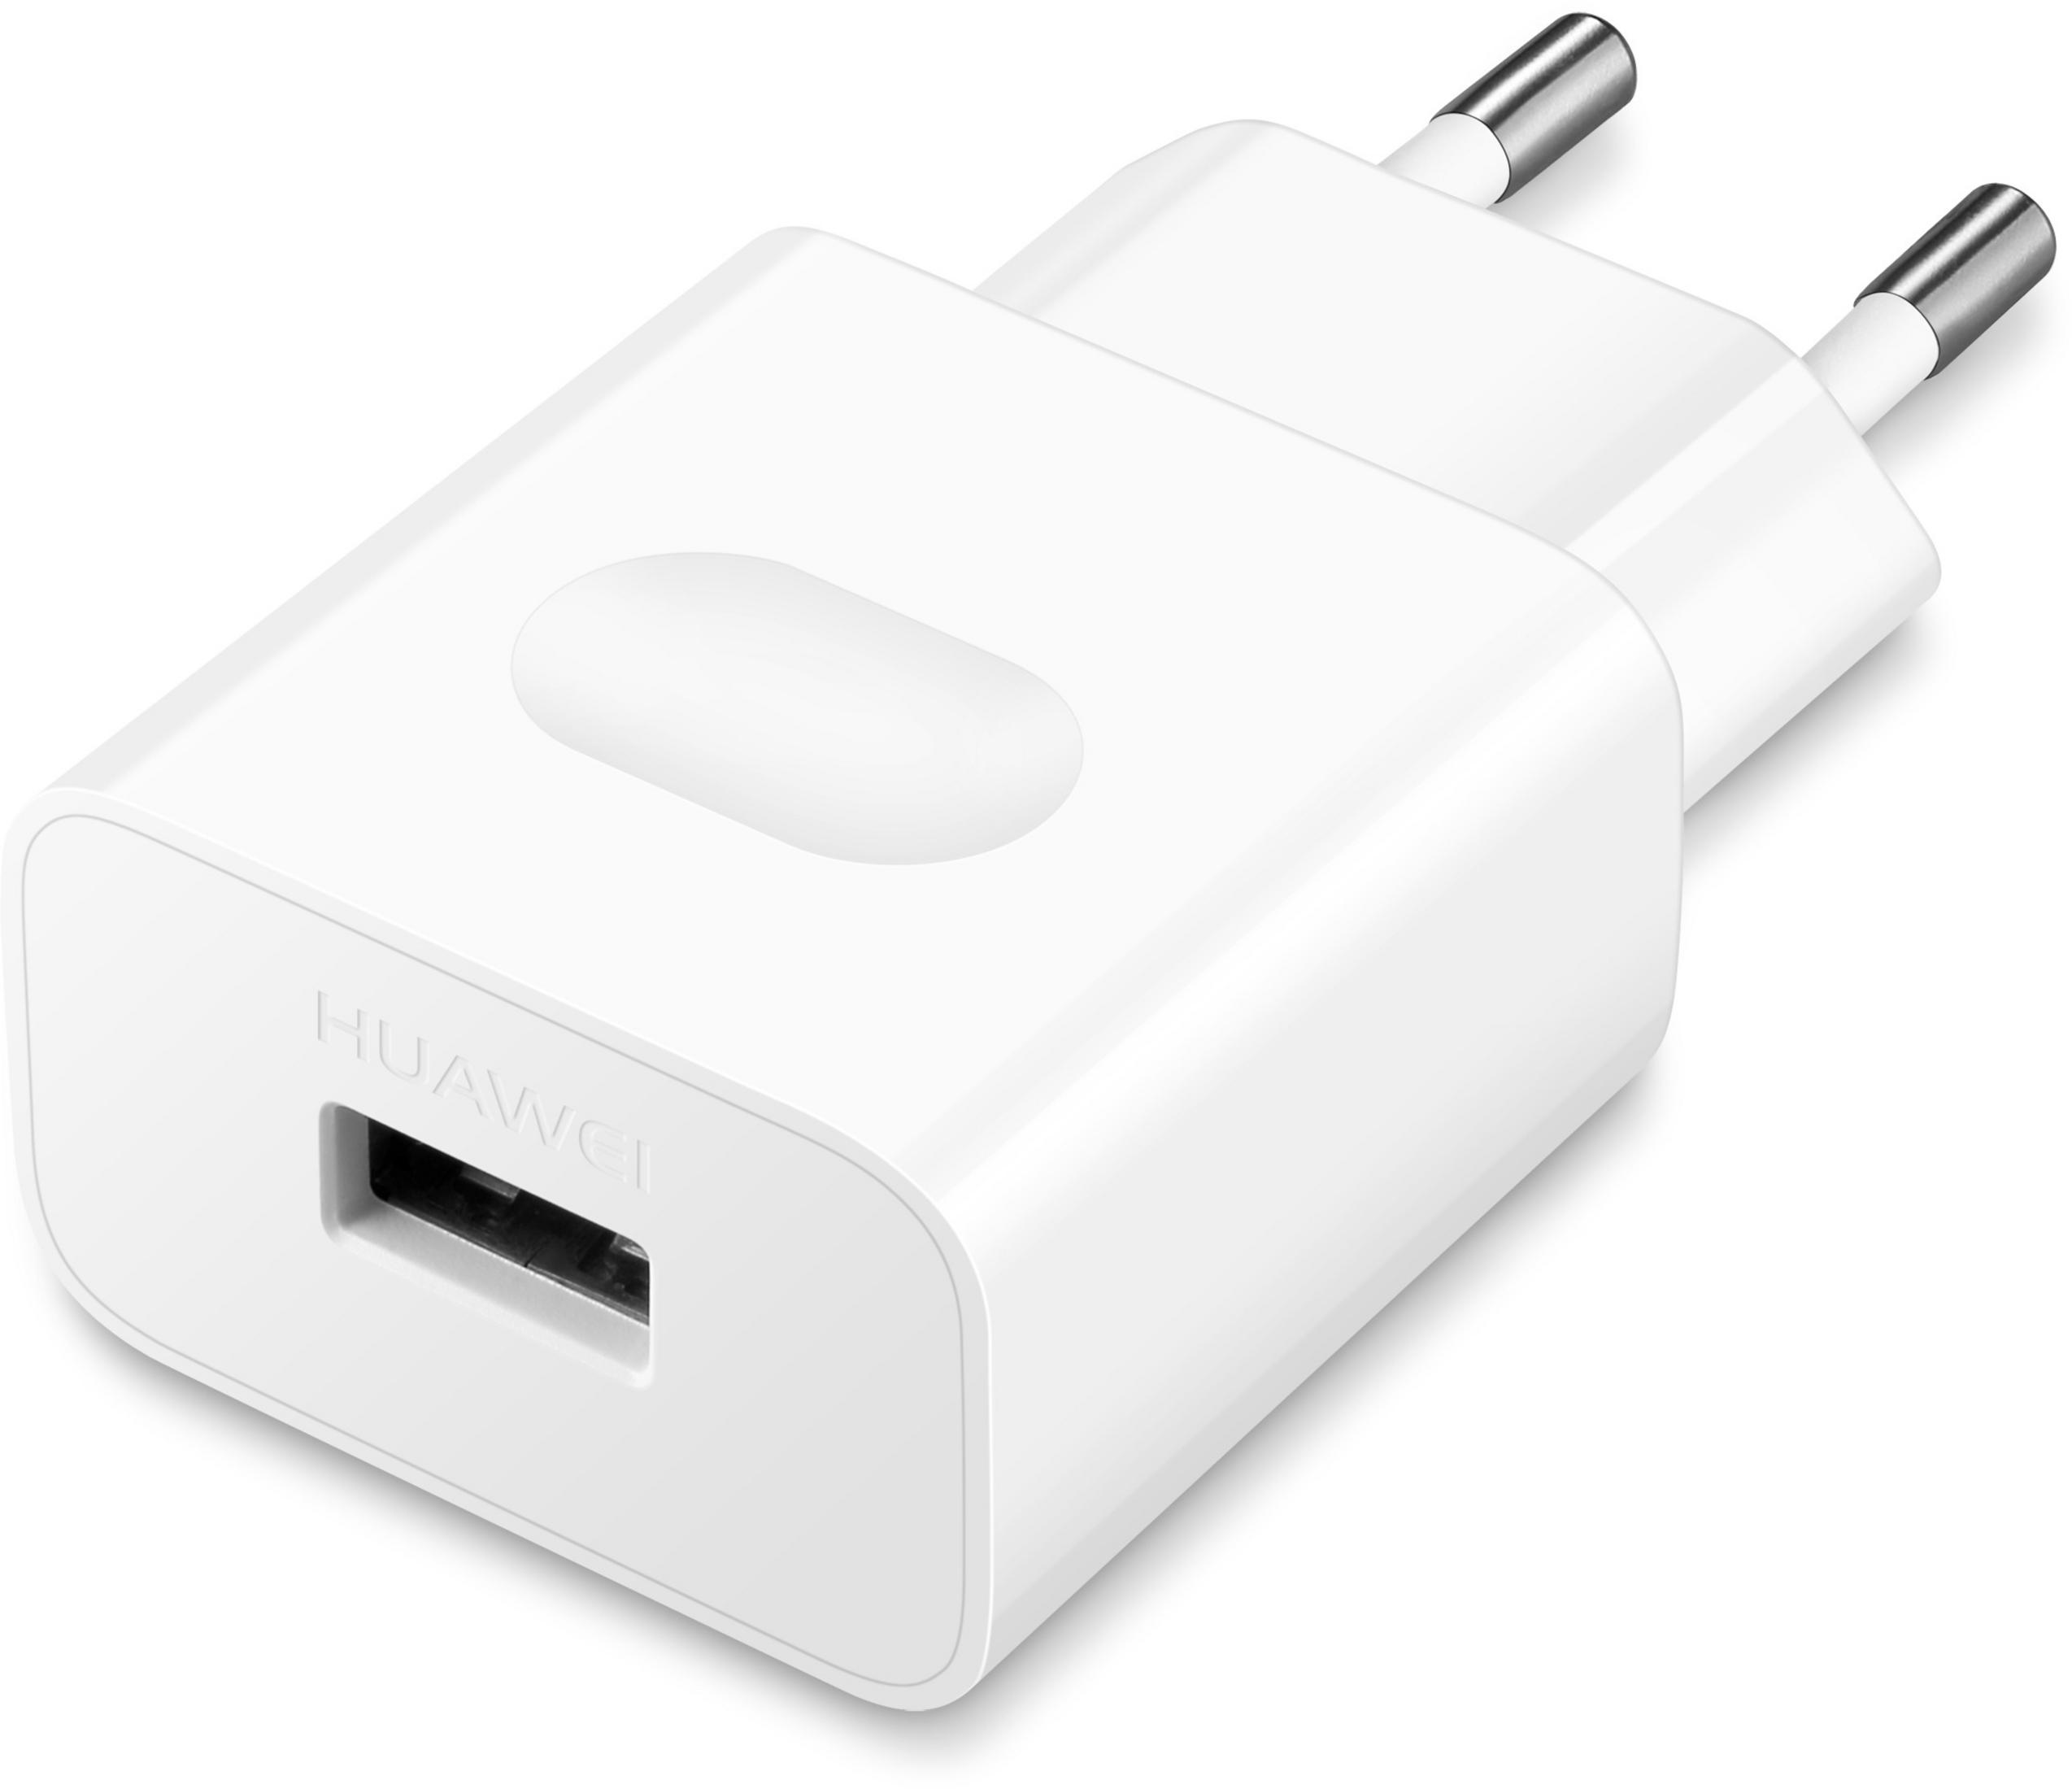 Volt, 240 AP32 Universal, USB Weiß - CABLE 190037 CHARGER Ladegerät HUAWEI USB-C 100